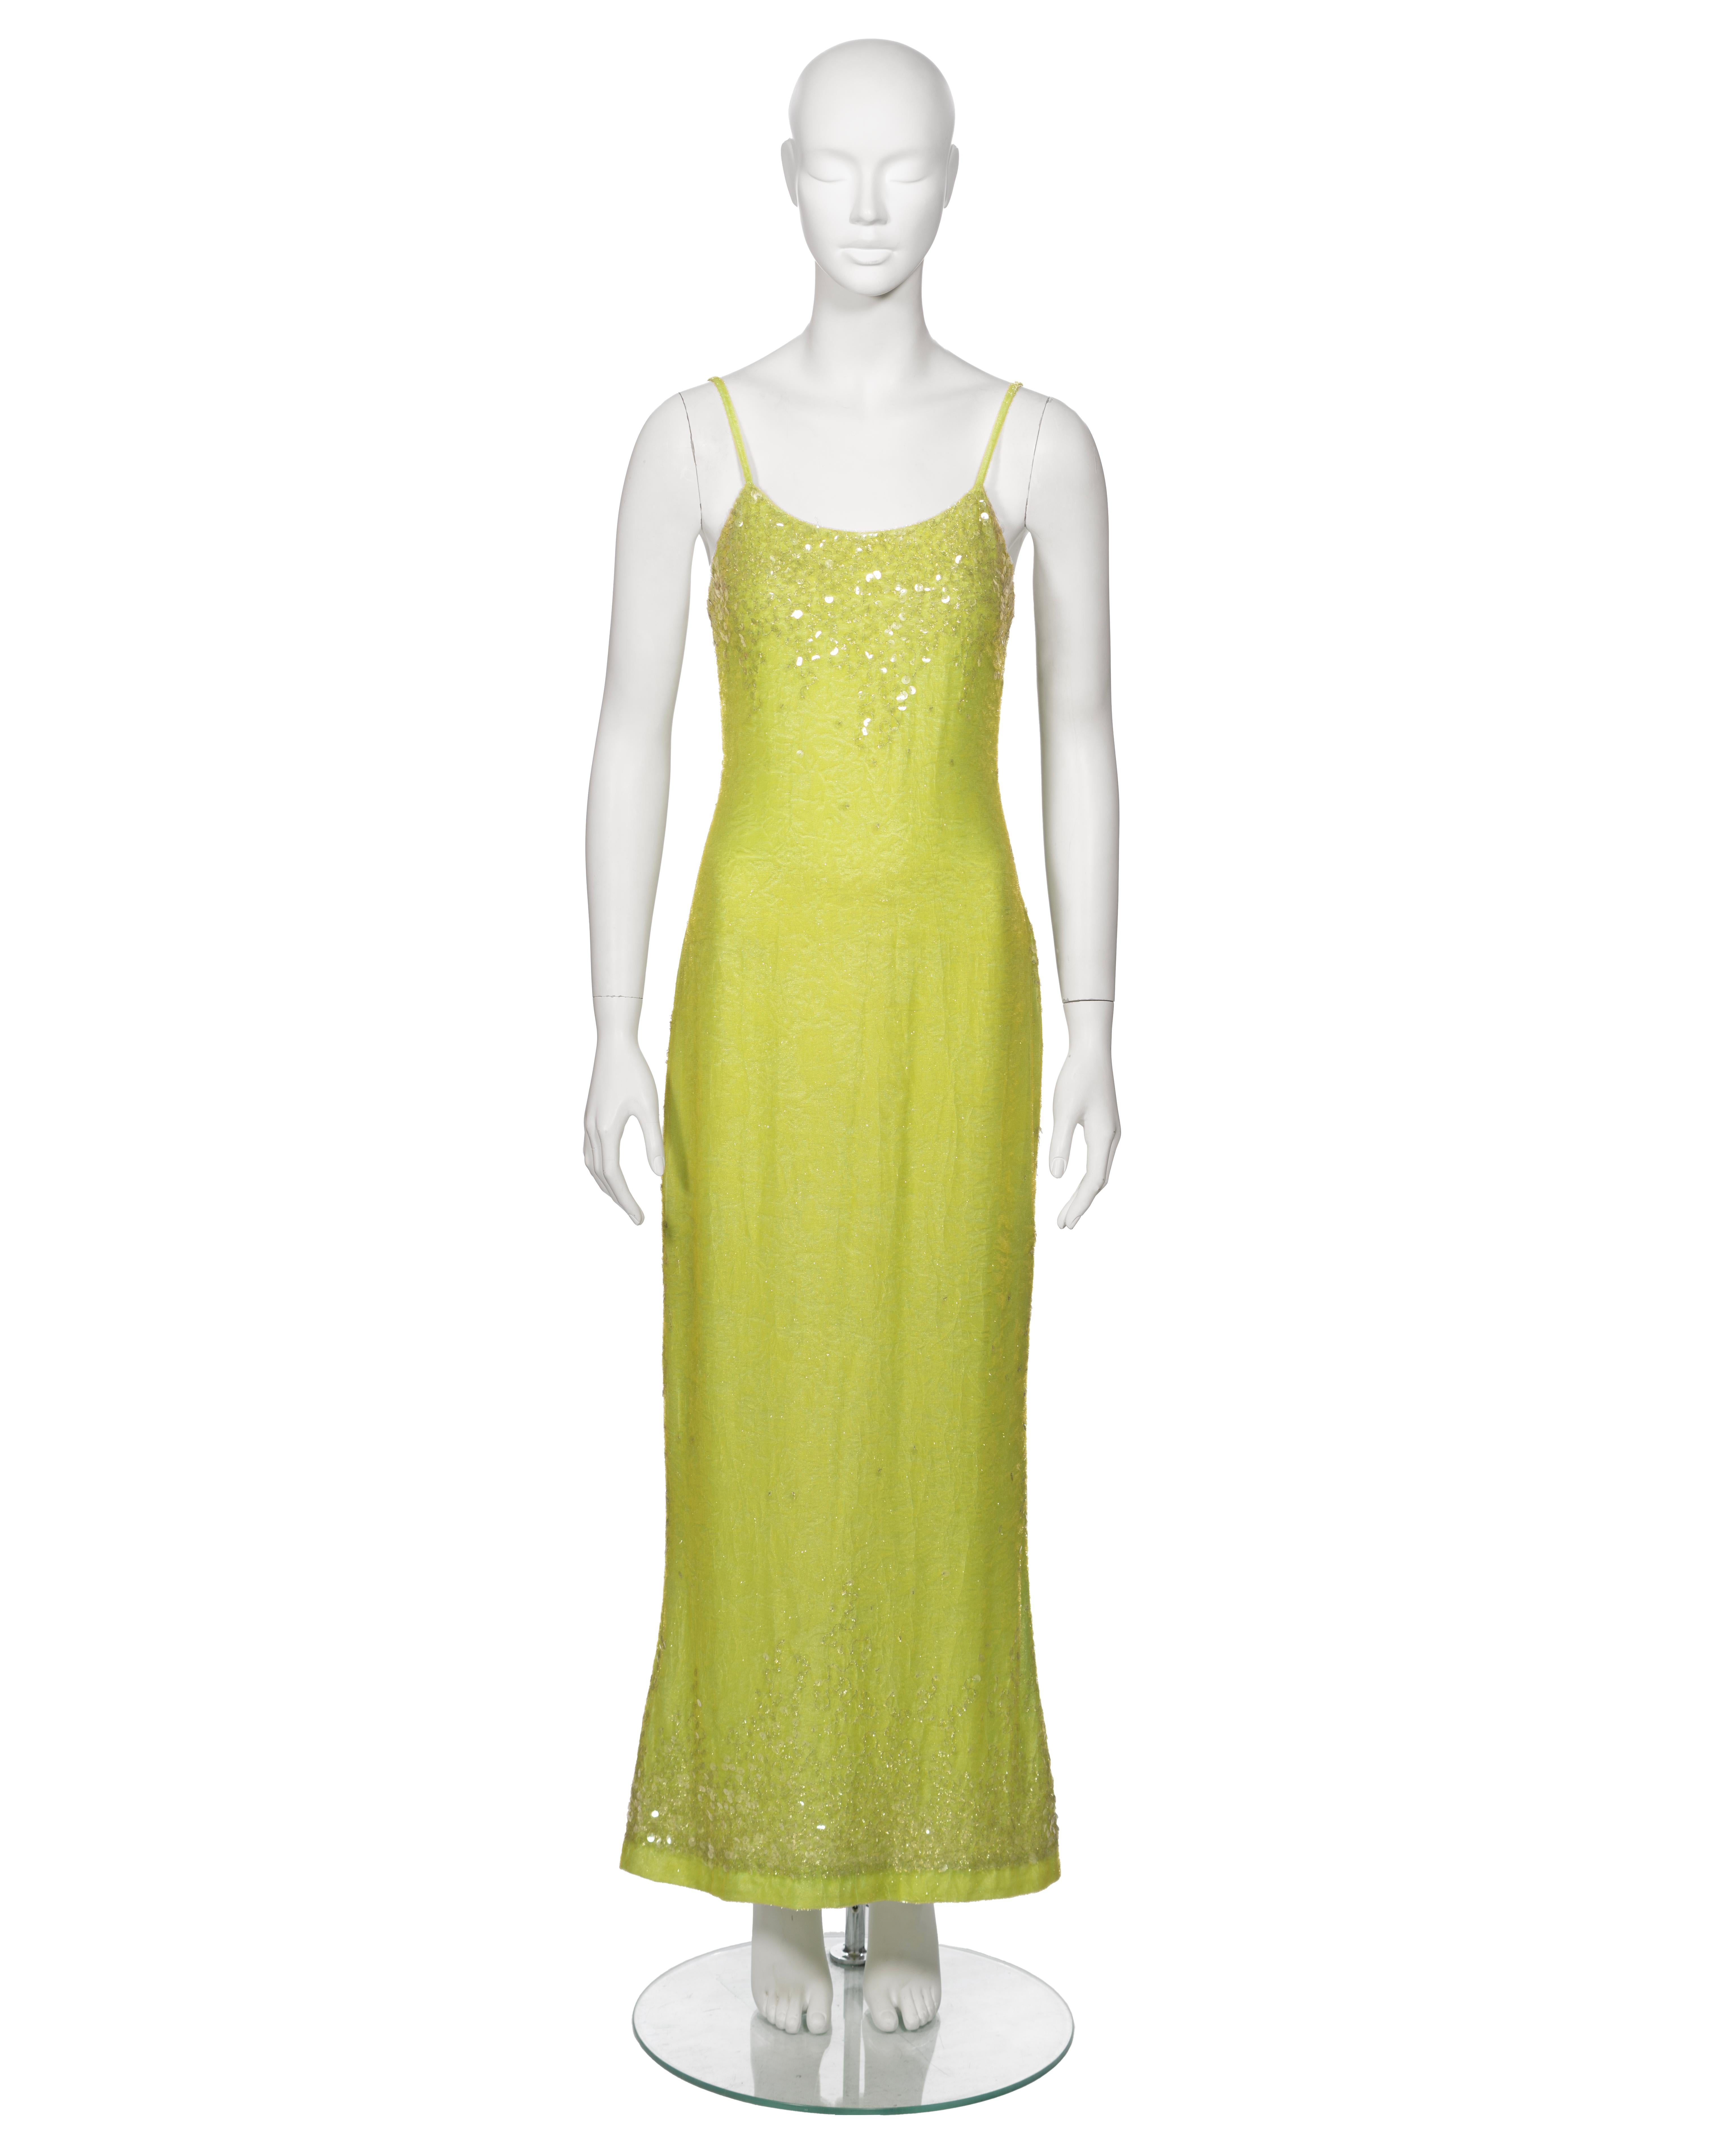 Women's Chanel by Karl Lagerfeld Embellished Lime Green Velvet Dress and Jacket, ss 1997 For Sale